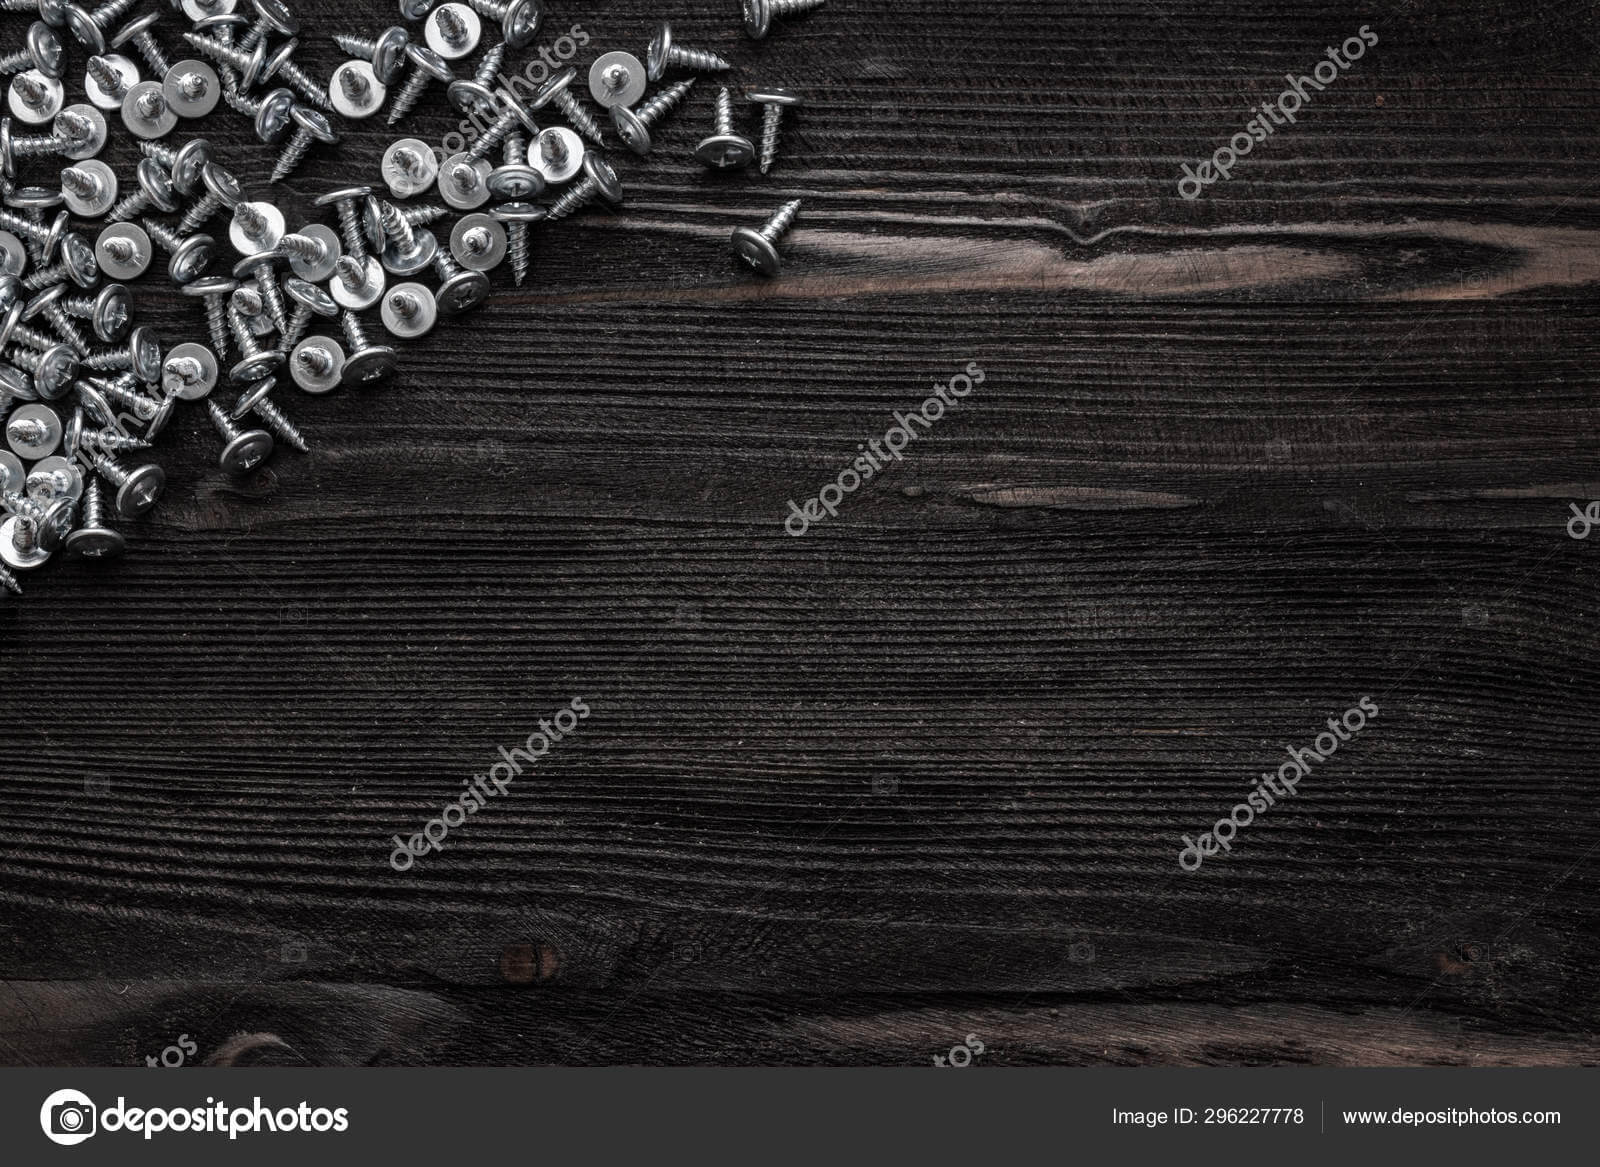 Some Wood Crews On Dark Wooden Desk Board Surface. Top View For Borderless Certificate Templates